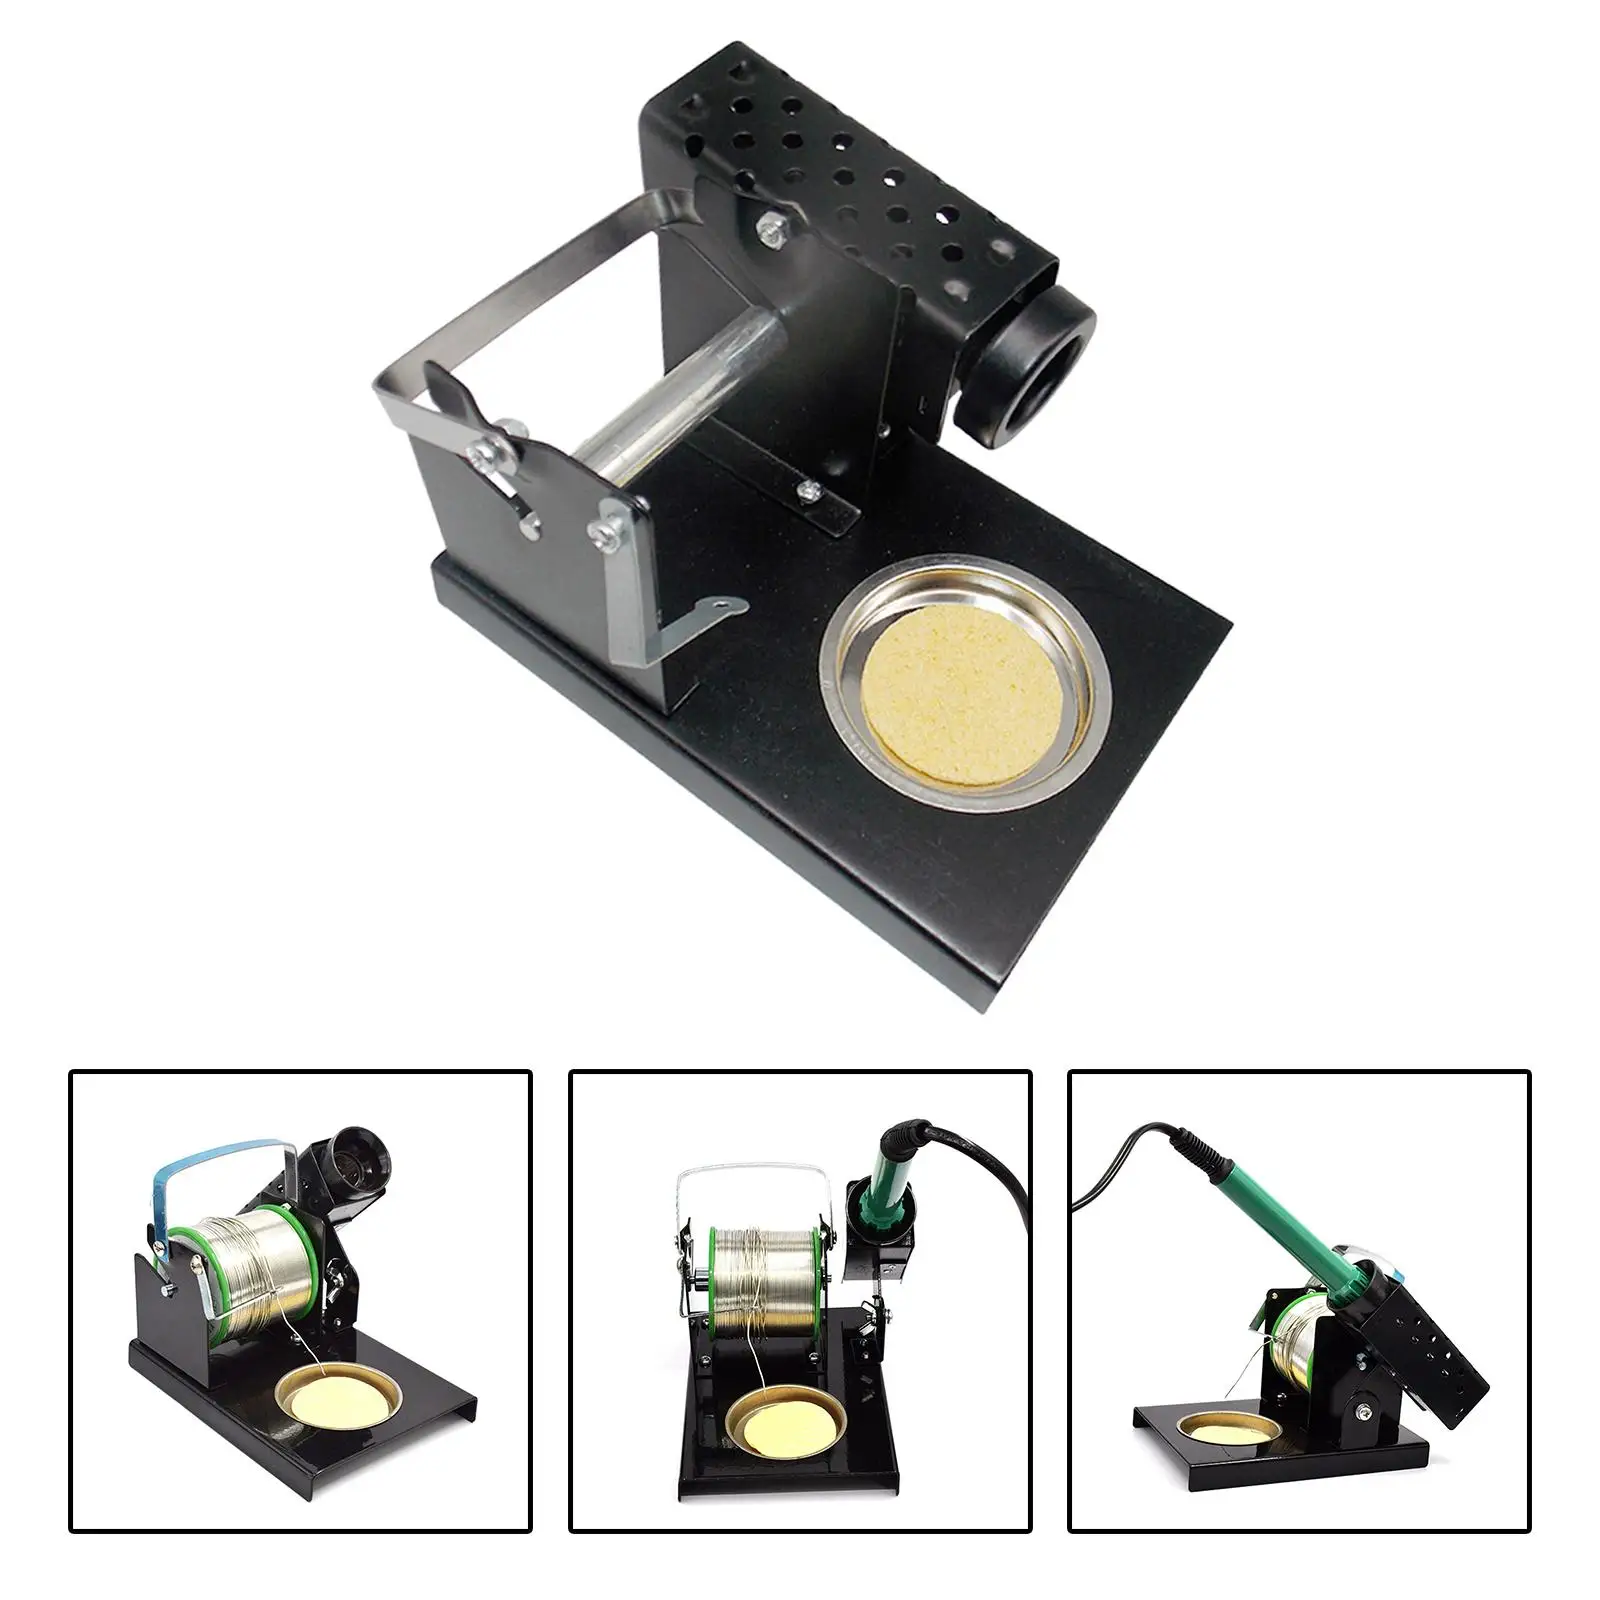 Heavy Duty Solder Iron Holder with Tip Cleaning Sponge Welding Accessories Metal Base High Temperature Resistance